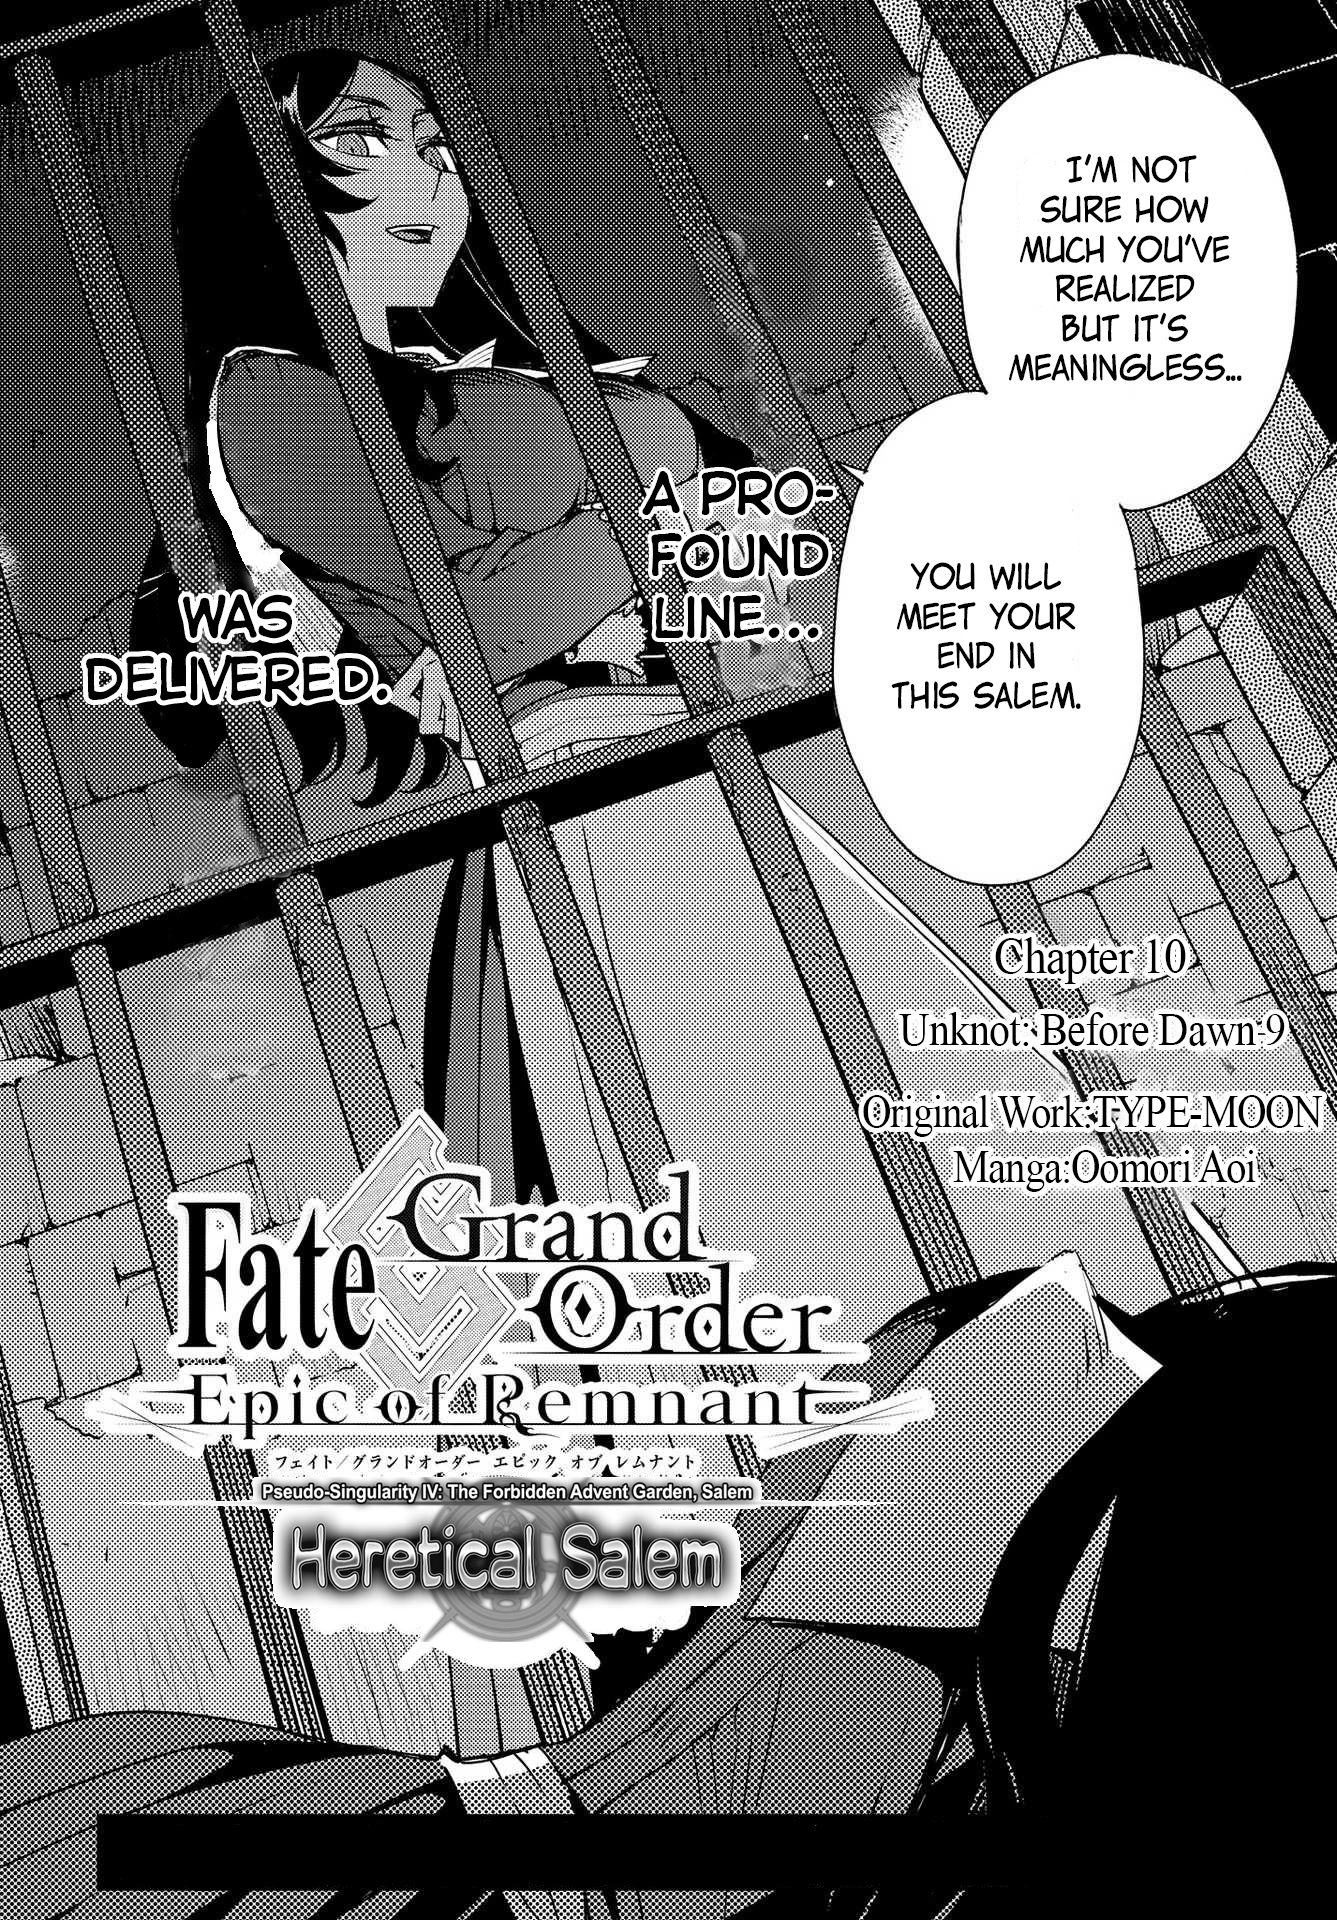 Fate/grand Order: Epic Of Remnant: Pseudo-Singularity Iv: The Forbidden Advent Garden, Salem - Heretical Salem Chapter 10: Unknot: Before Dawn 9 - Picture 2